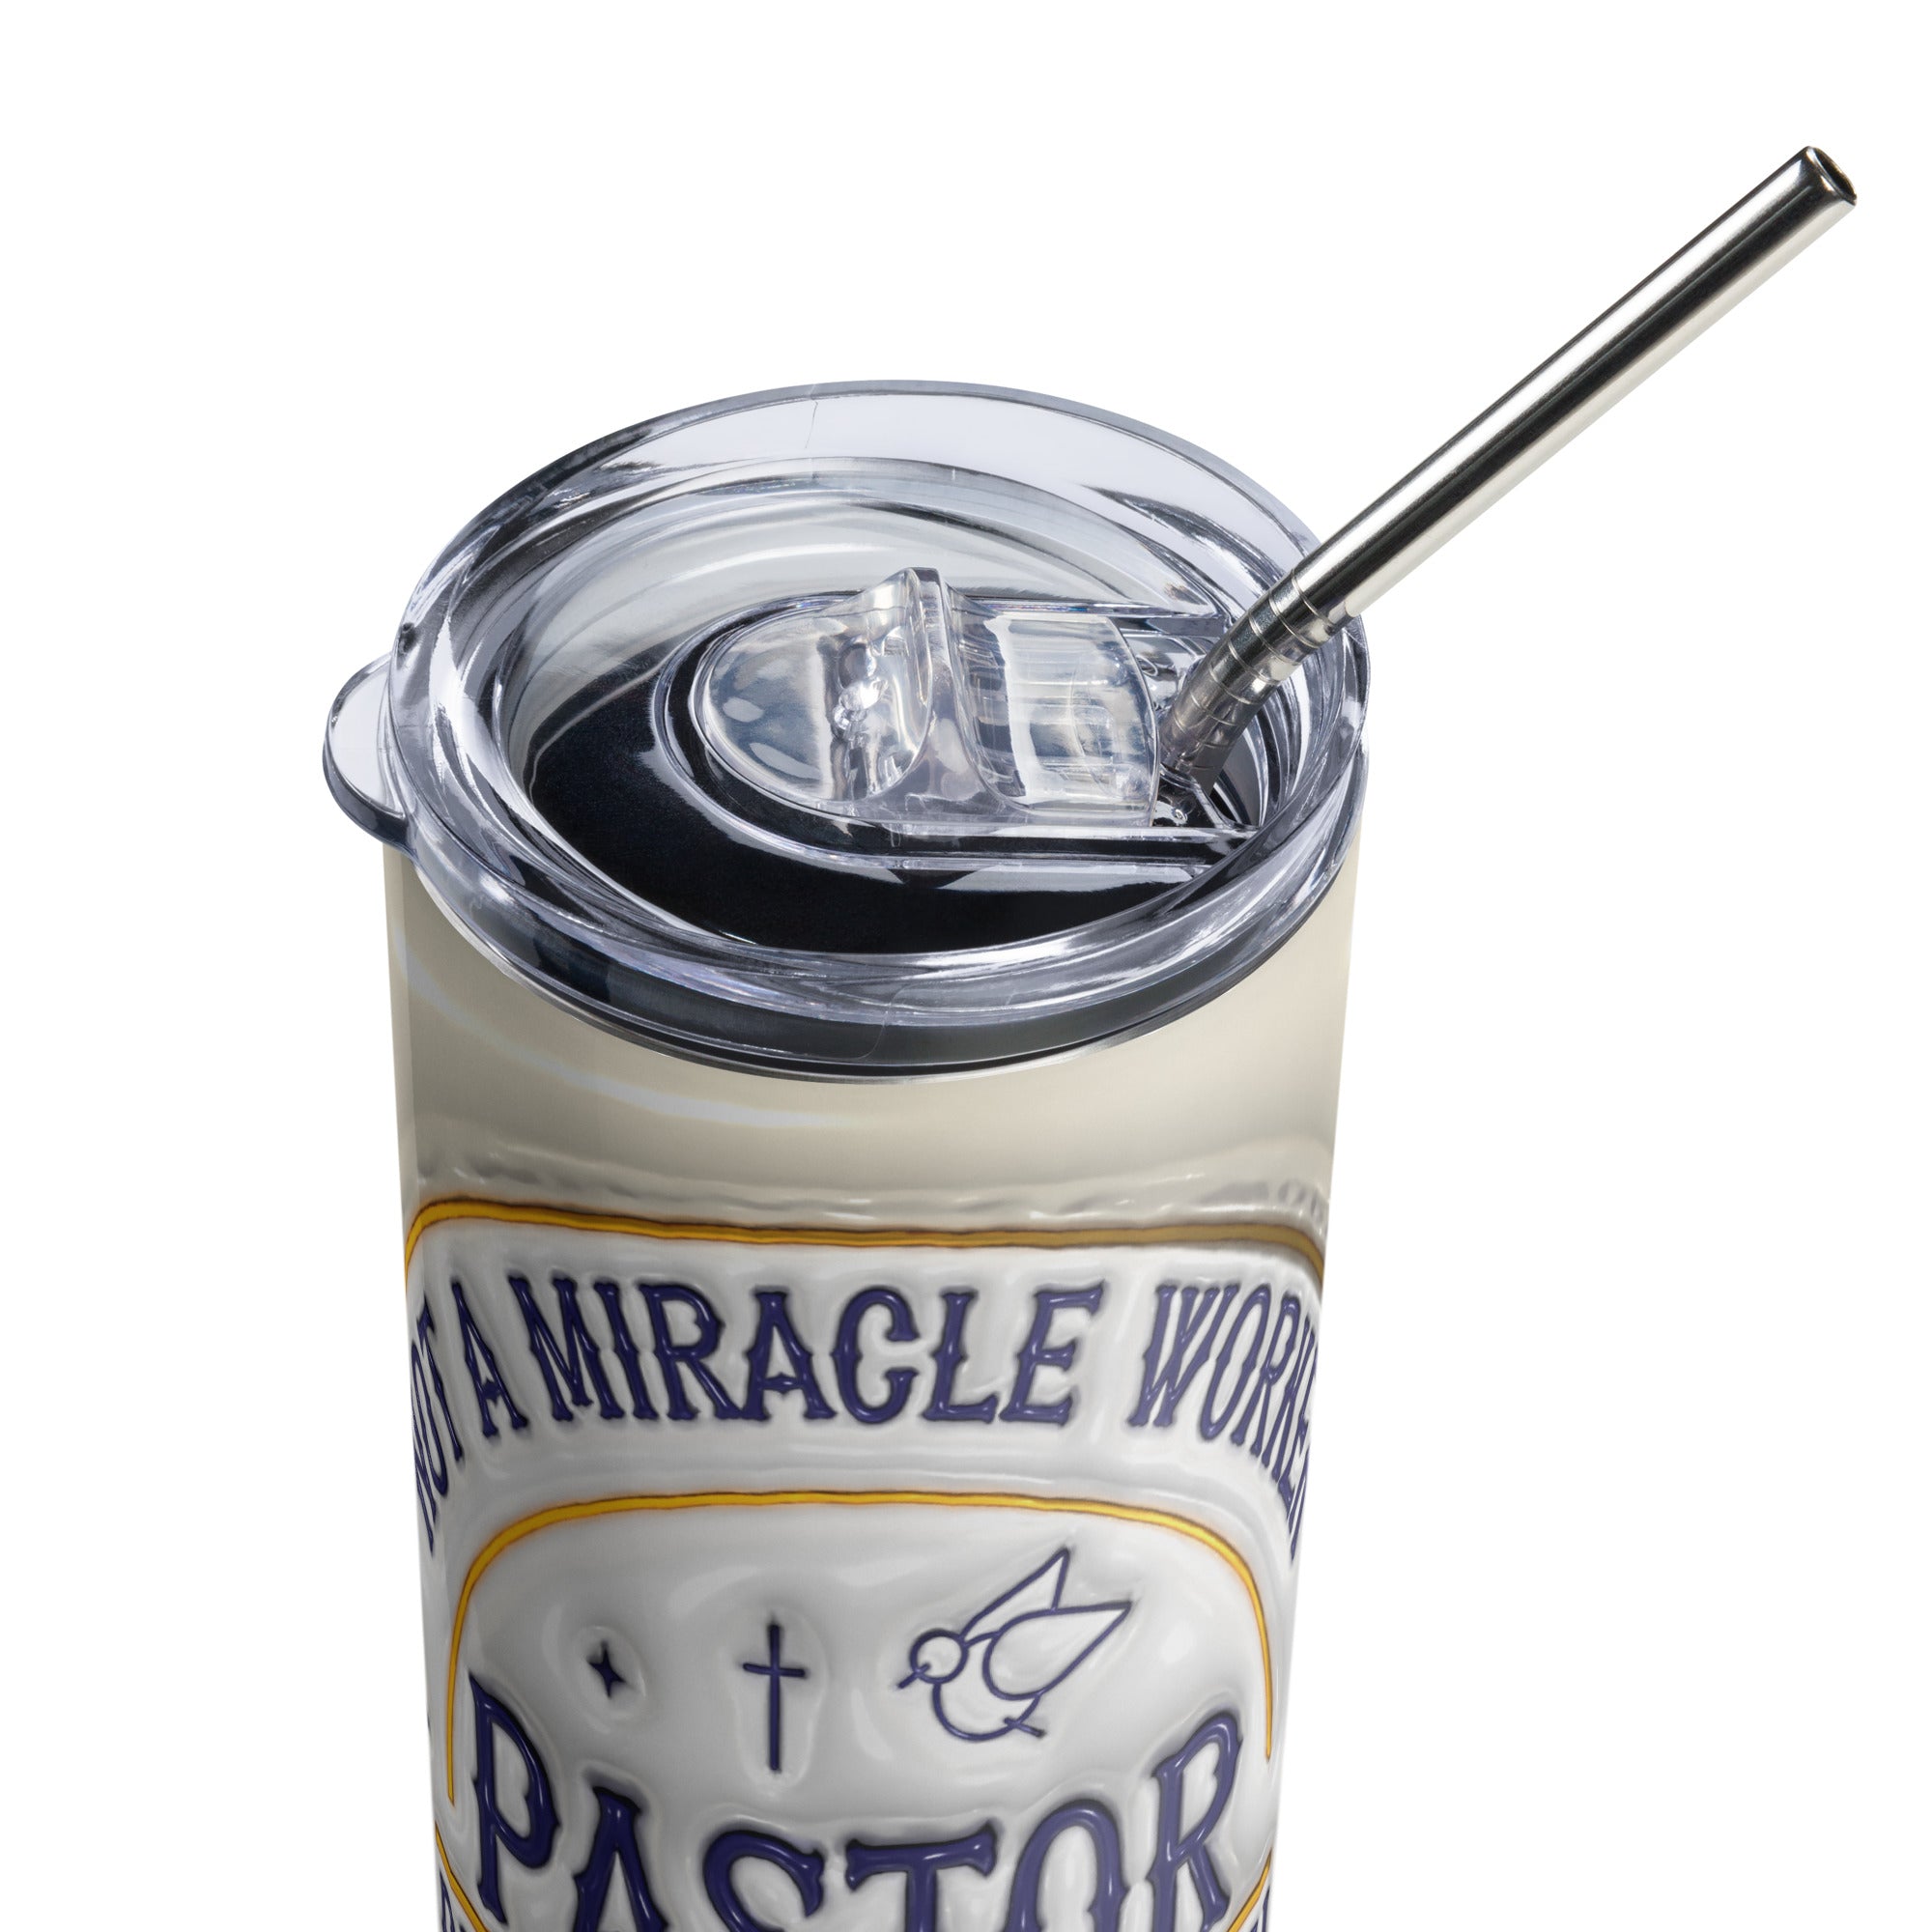 Pastor I Can Lead You 20 oz Tumbler with reusable Stainless Steel Straw Size: 20oz Color: White Jesus Passion Apparel